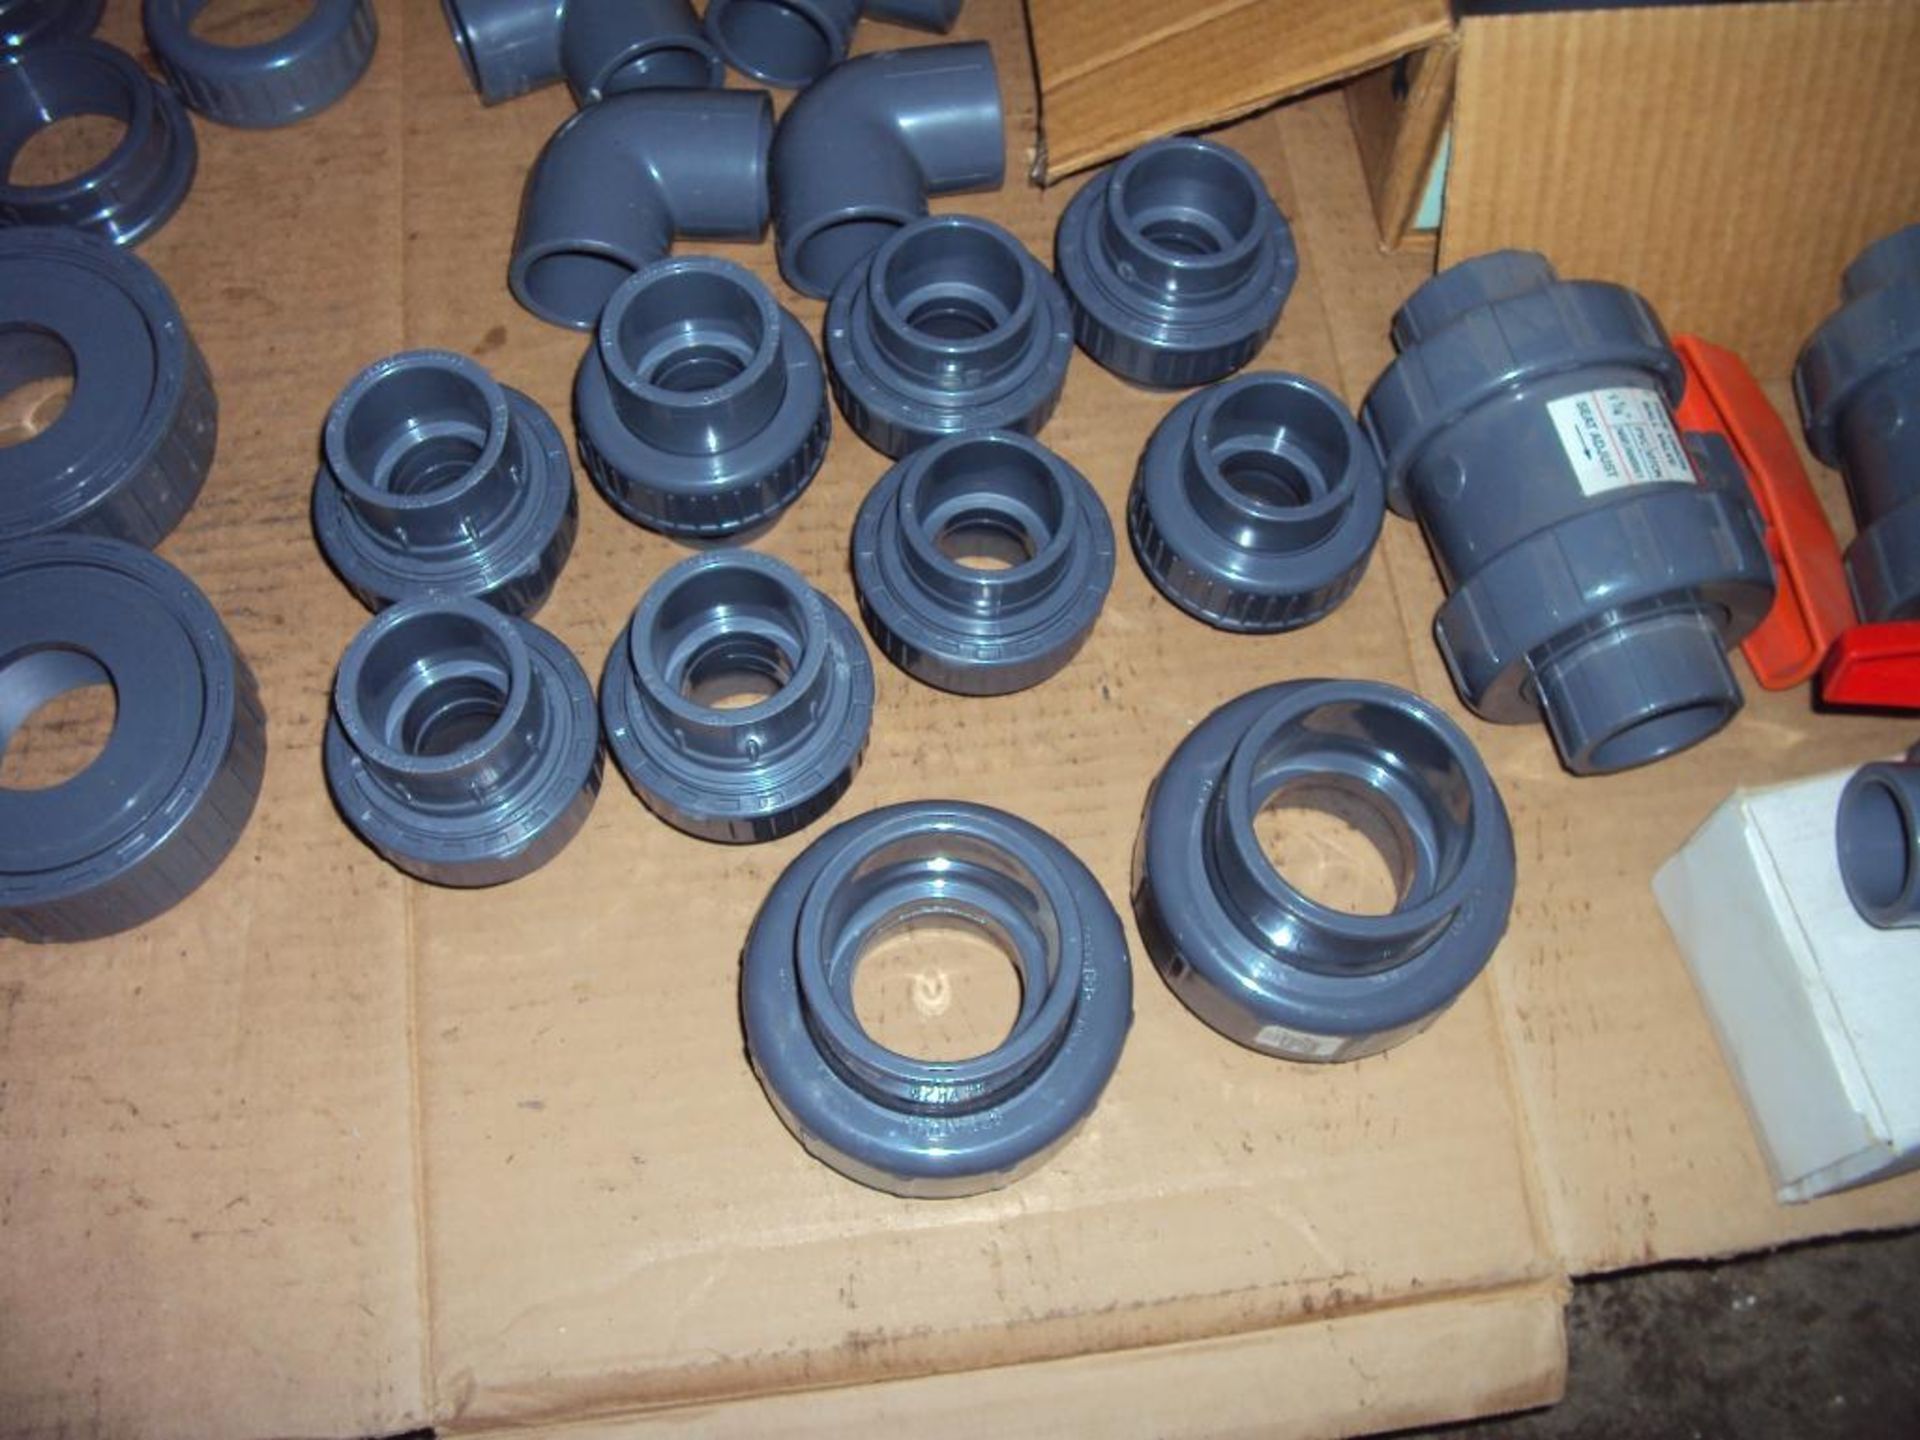 Lot of PVC and CPVC fittings, unions and valves - Image 5 of 9